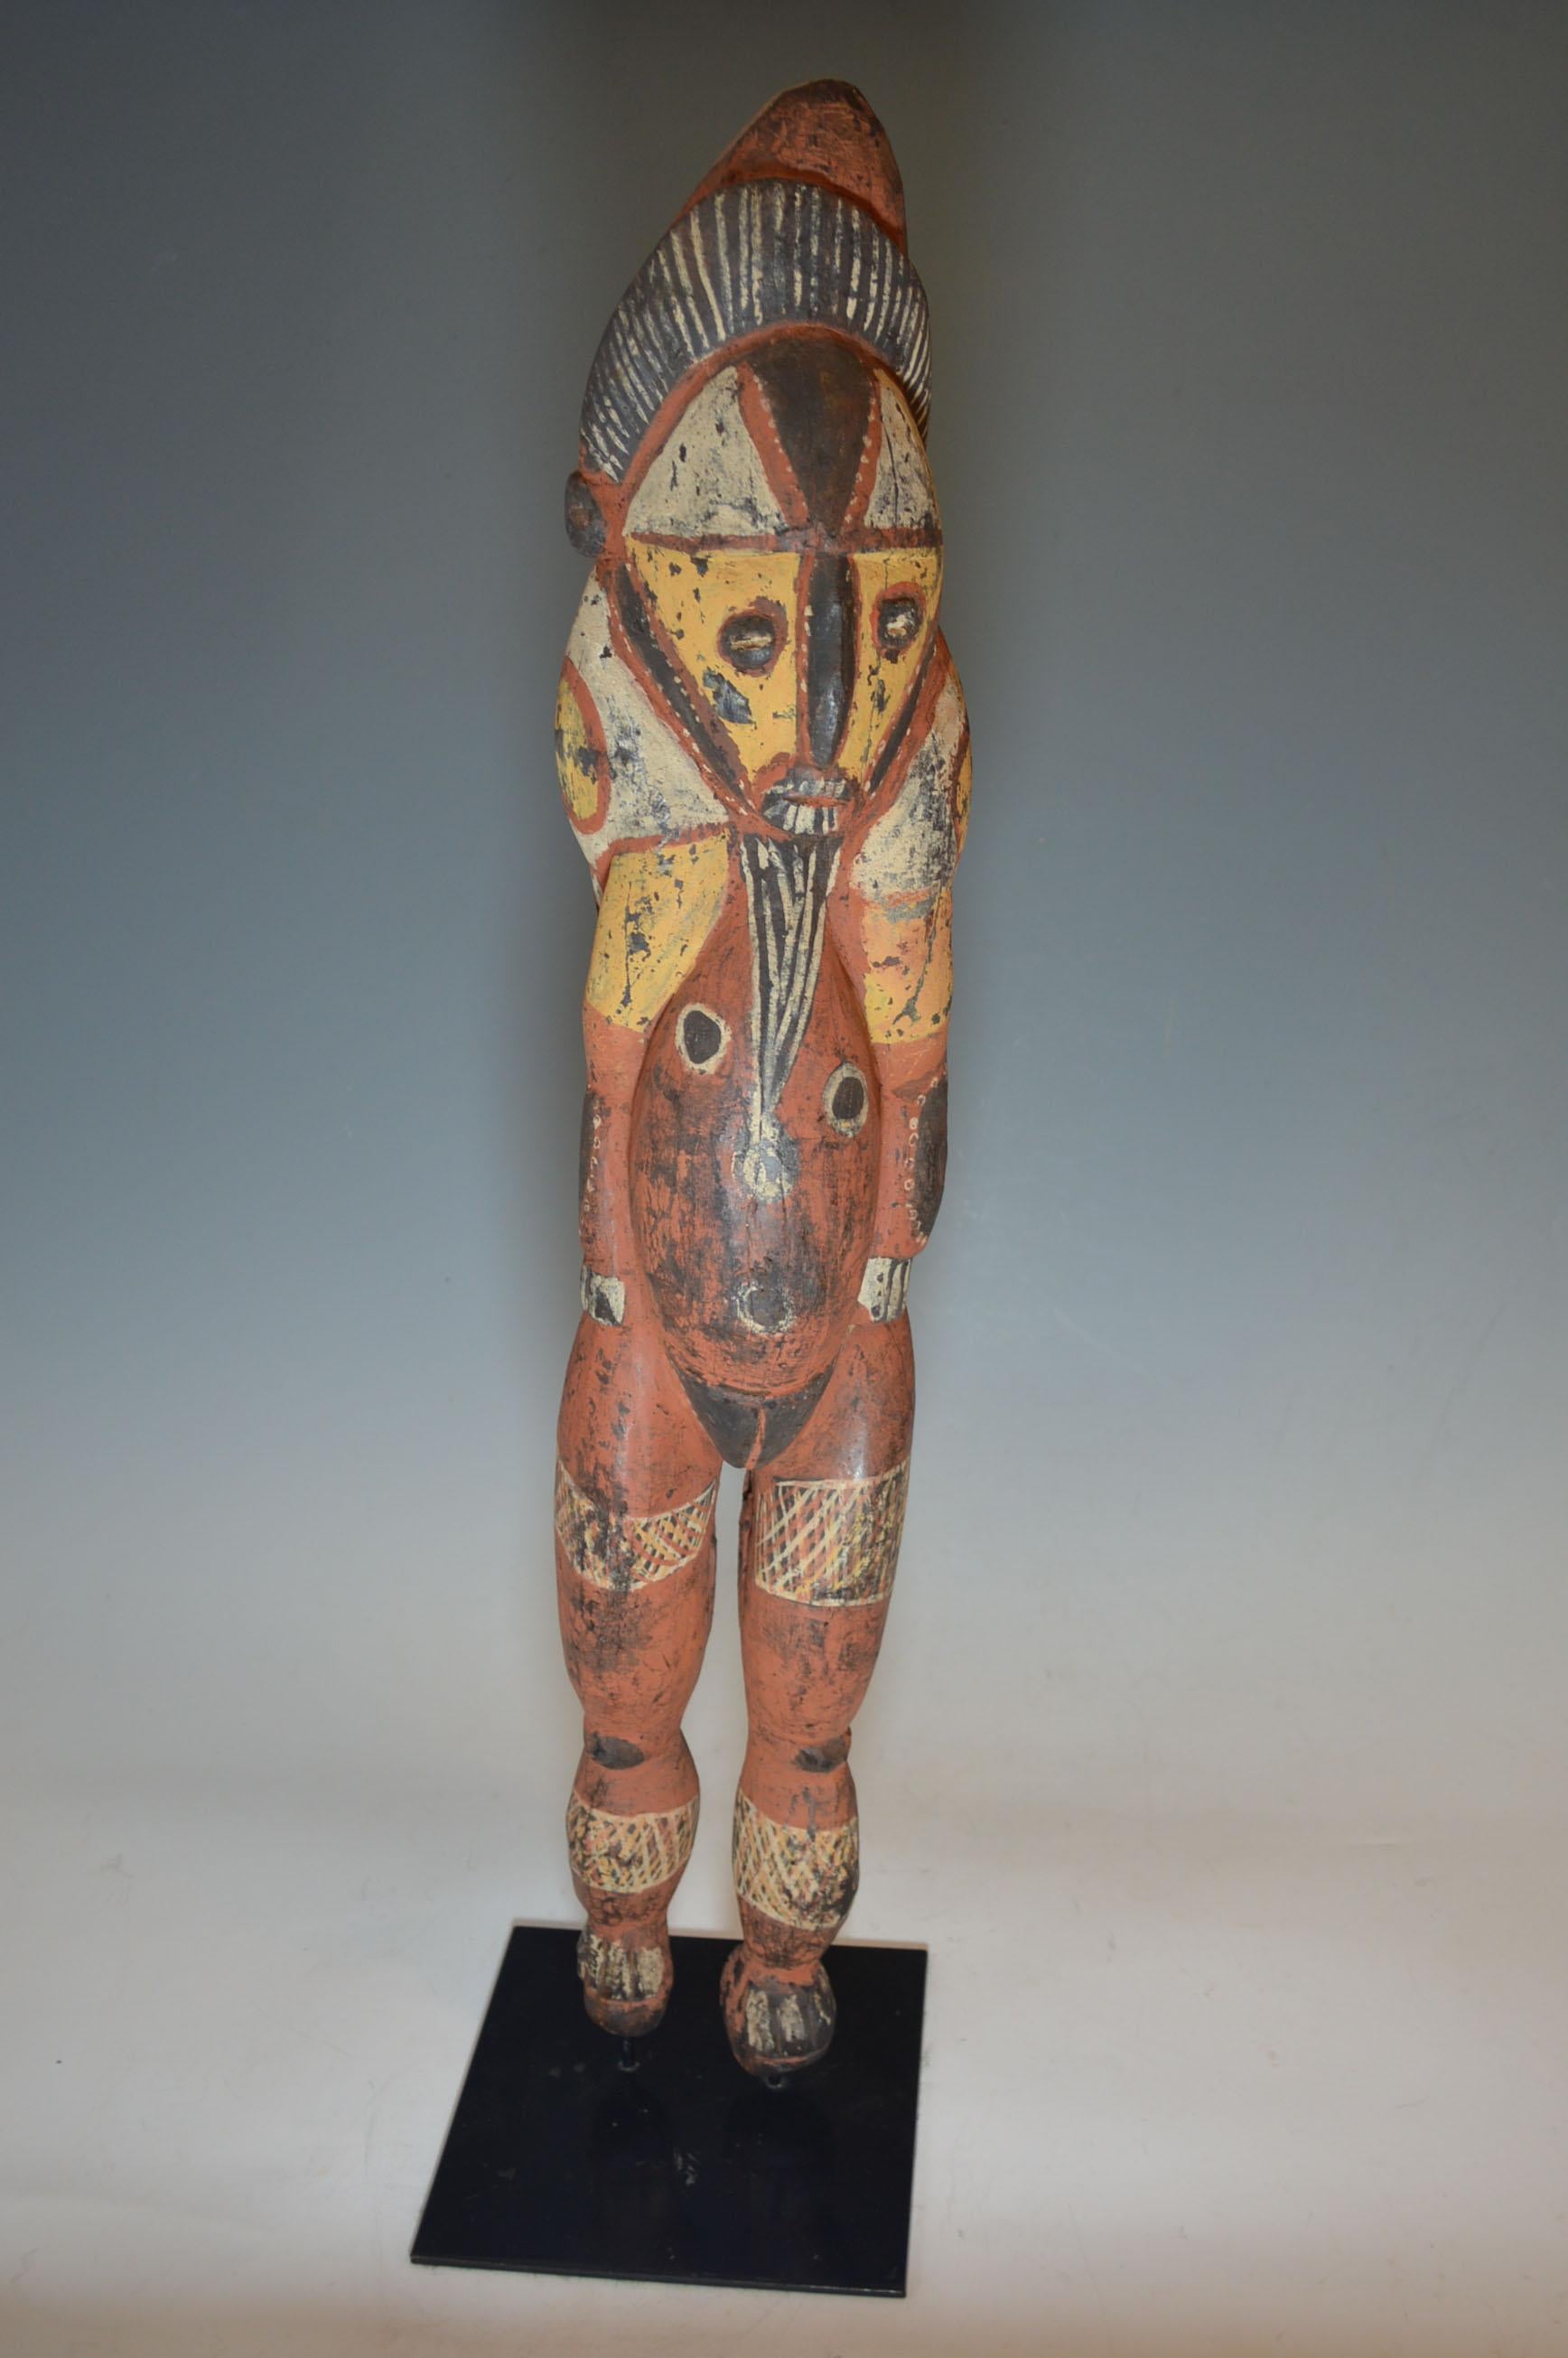 A fine Ambelam figure
Mapric river Papua new Guinea
Carved heavy hard wood with yellow, red, white and black paint, 82 cm high,
Provenance: Ex collection of Mrs Douglas Carnegie,
Acquired Christie's South Kensington ,
Tribal Art, 7 March